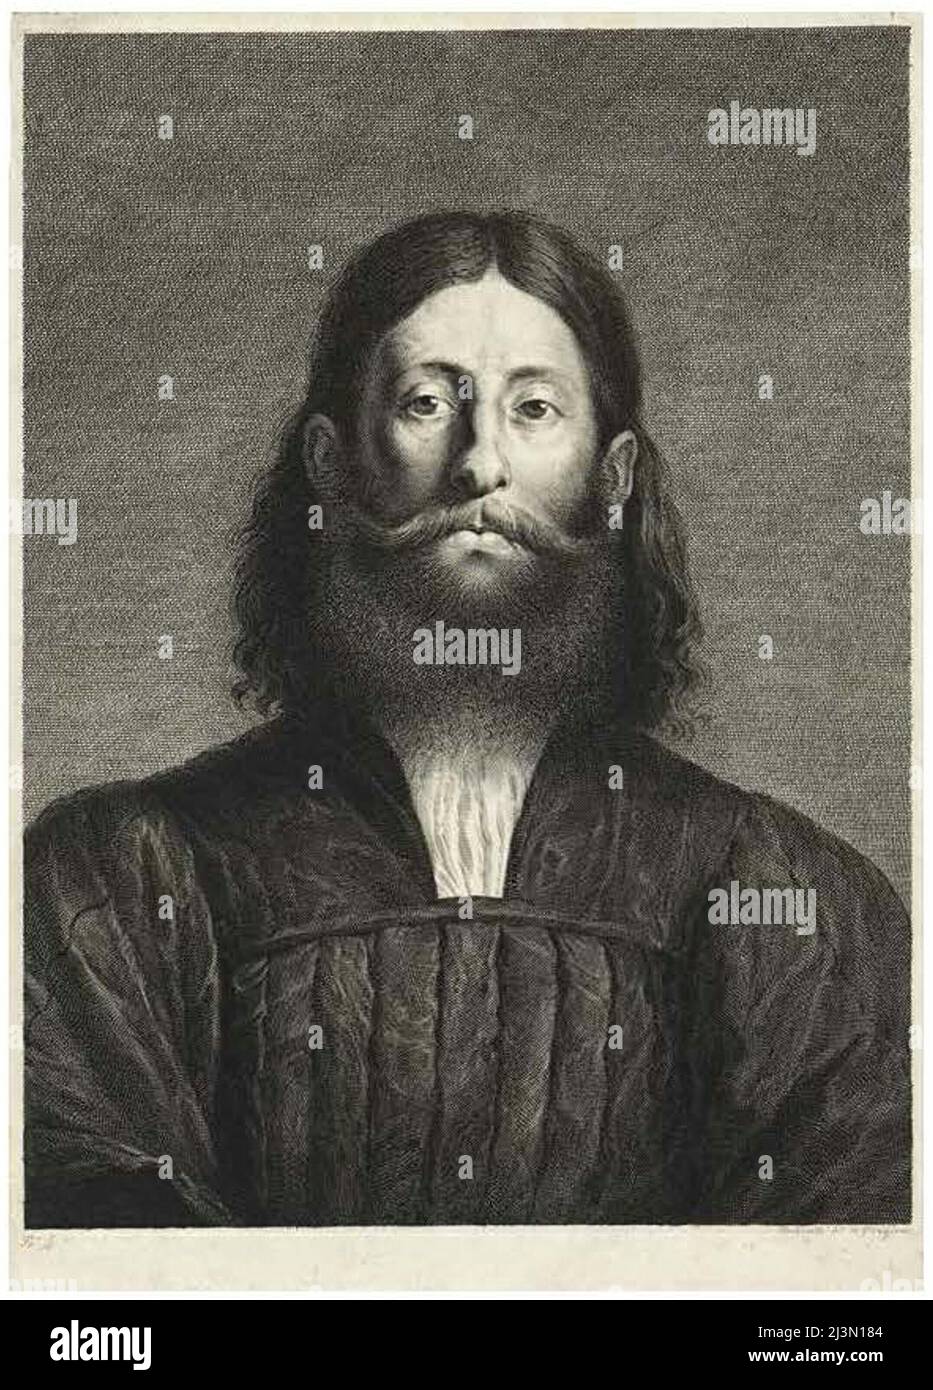 Portrait of a Bearded Man (so-called portrait of Giorgione), from Cabinet Reynst; Variarum imaginum a celeberrimis artificibus pictarum Caelaturae (Cabinet Reynst: Engravings of various images painted by famous artists), 1655/58. Stock Photo